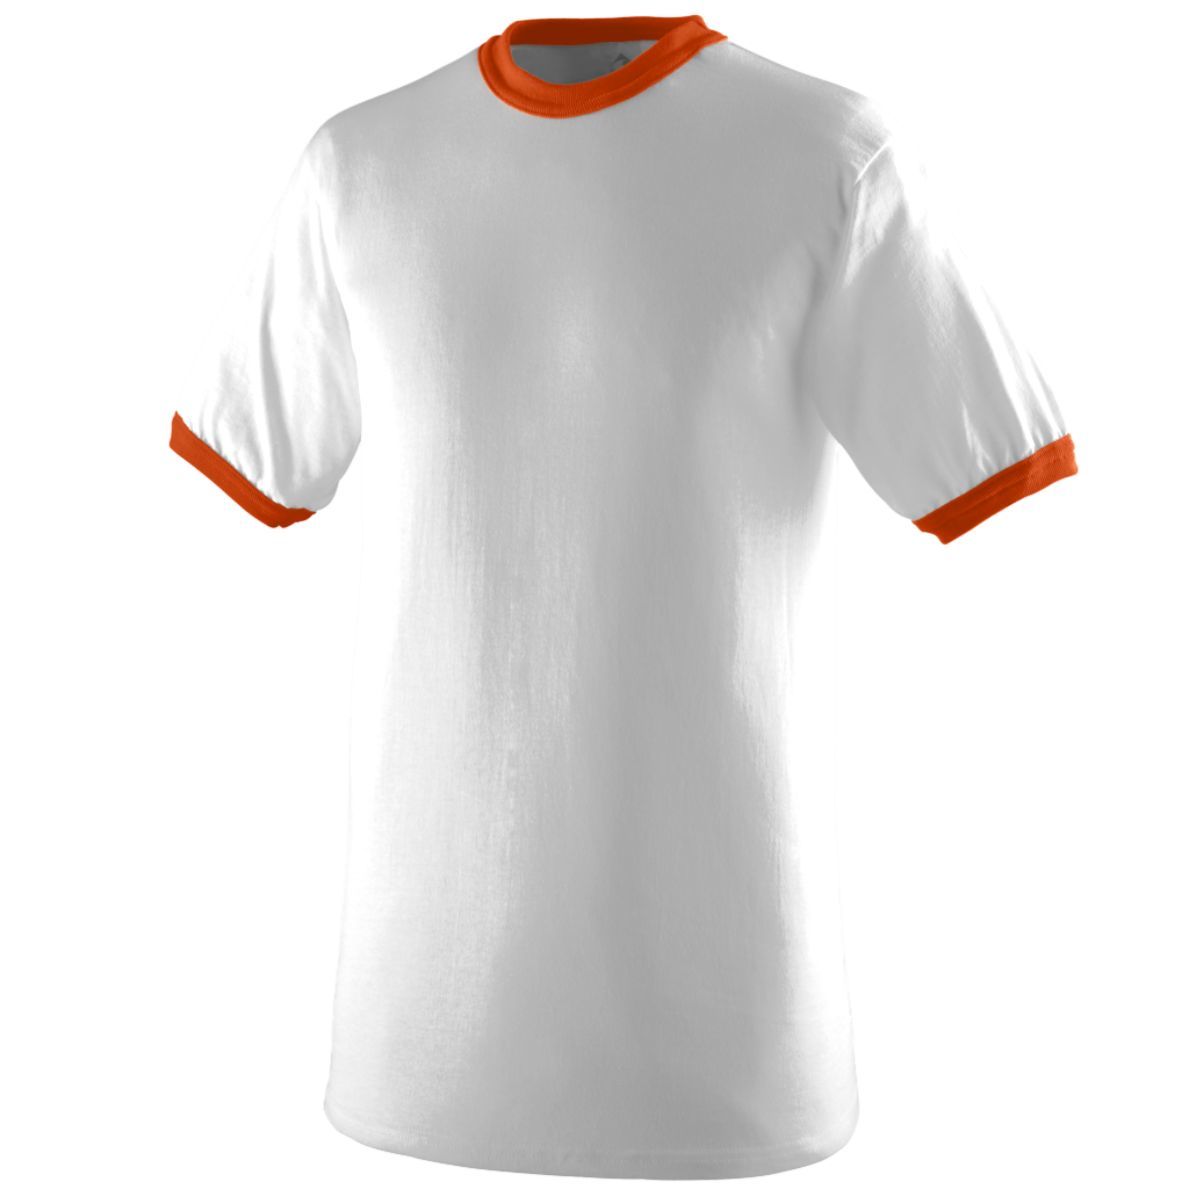 Augusta Sportswear Youth-Ringer T-Shirt in White/Orange  -Part of the Youth, Youth-Tee-Shirt, T-Shirts, Augusta-Products, Soccer, Shirts, All-Sports-1 product lines at KanaleyCreations.com